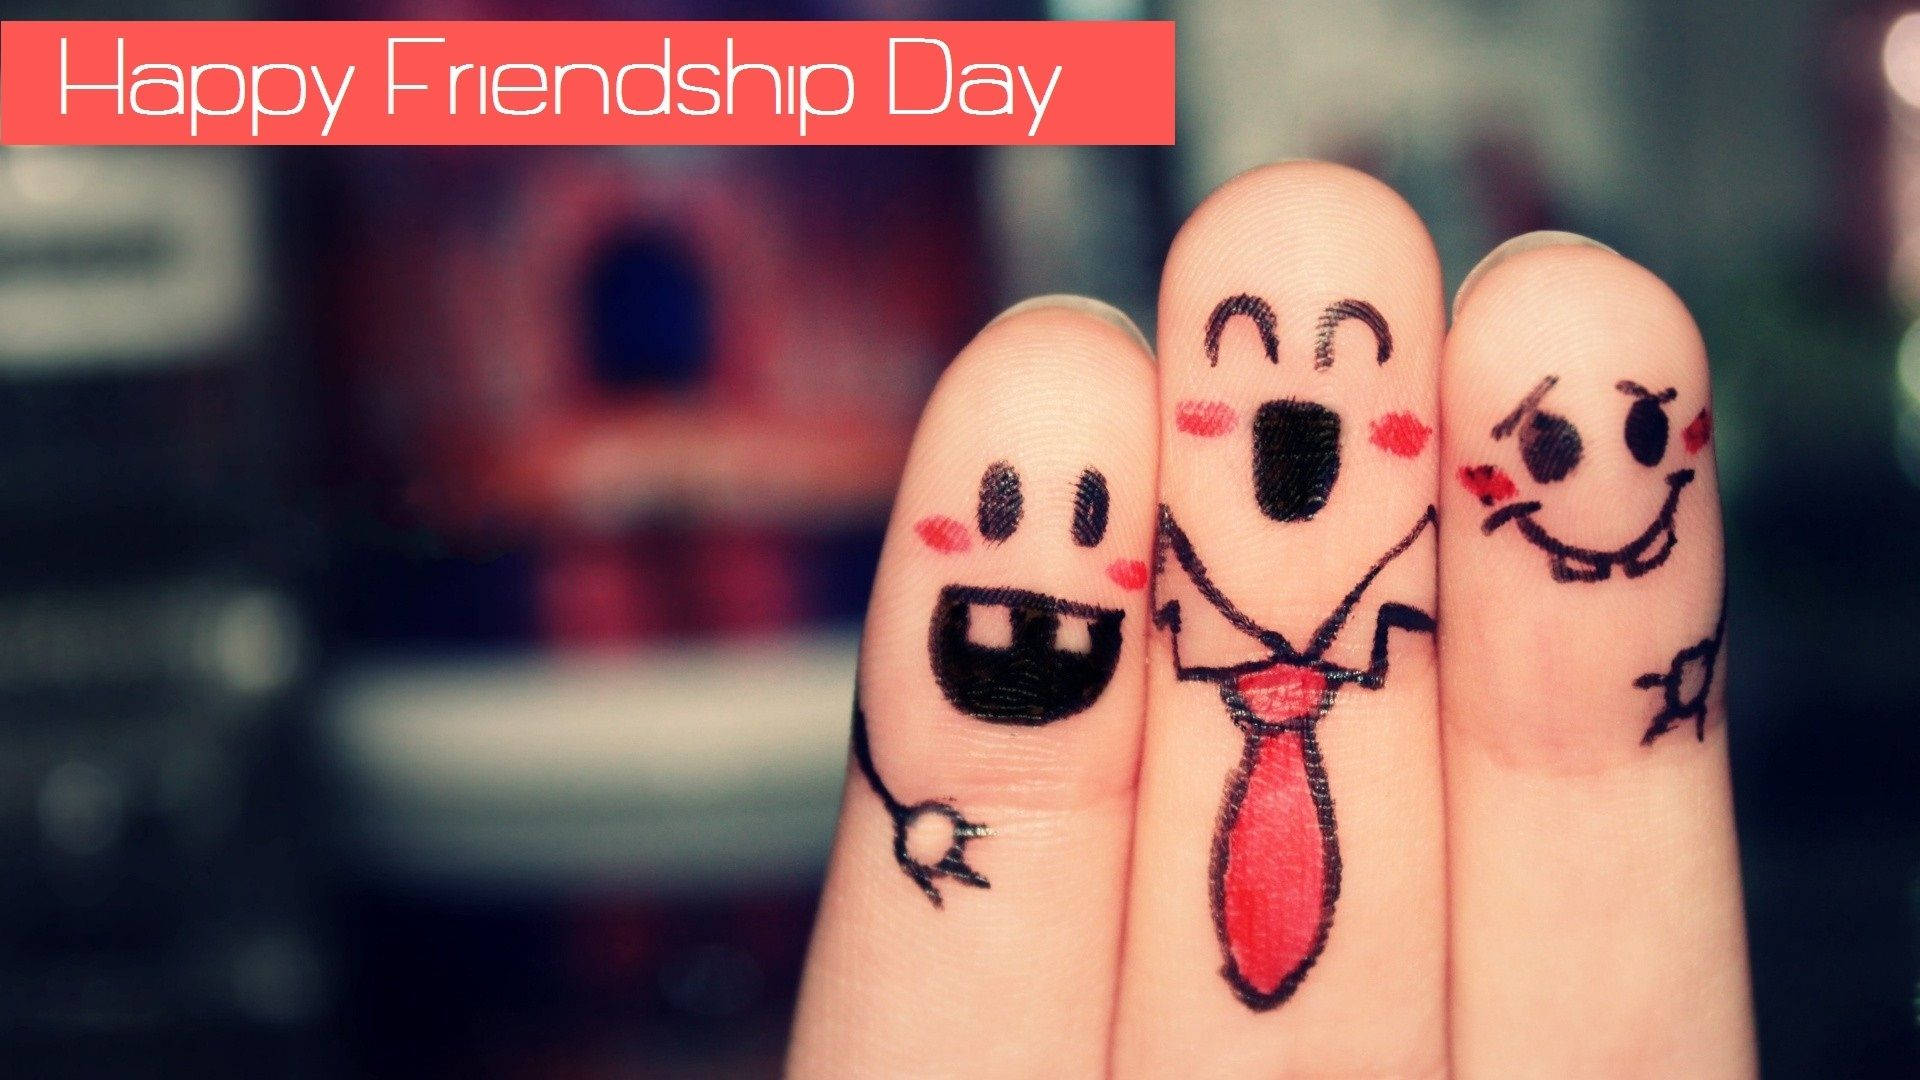 Friendship Day  Happy friendship day quotes Happy friendship day  Friendship quotes funny